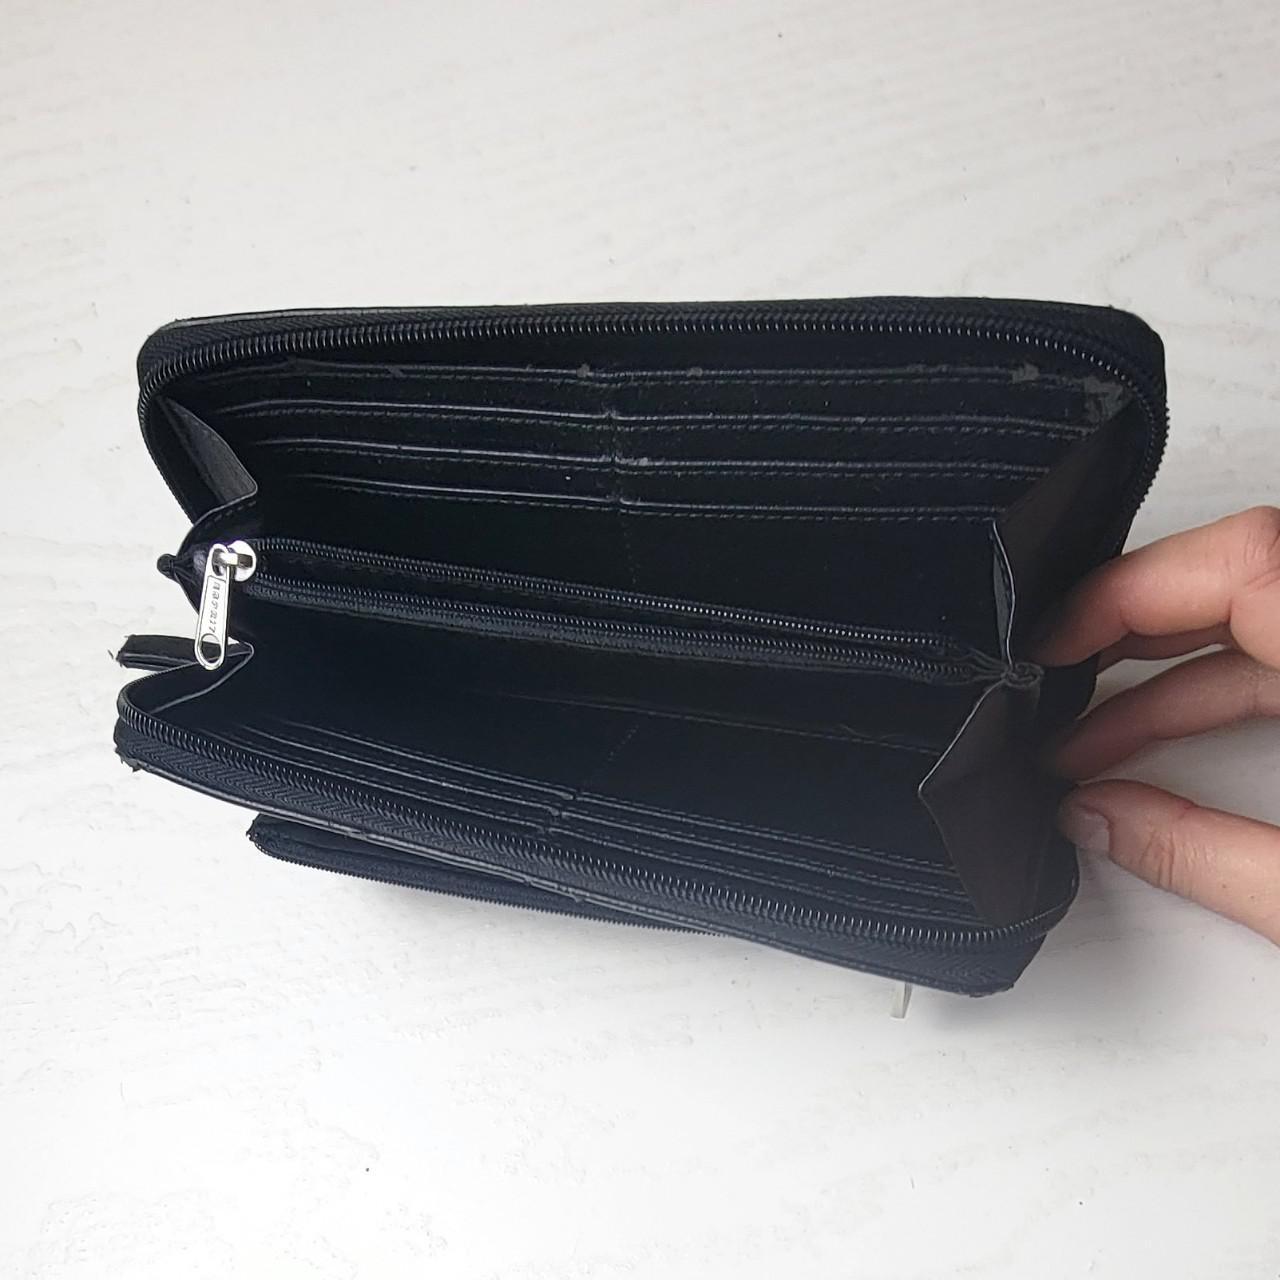 Product Image 3 - Esprit Wallet

Black Leather with white